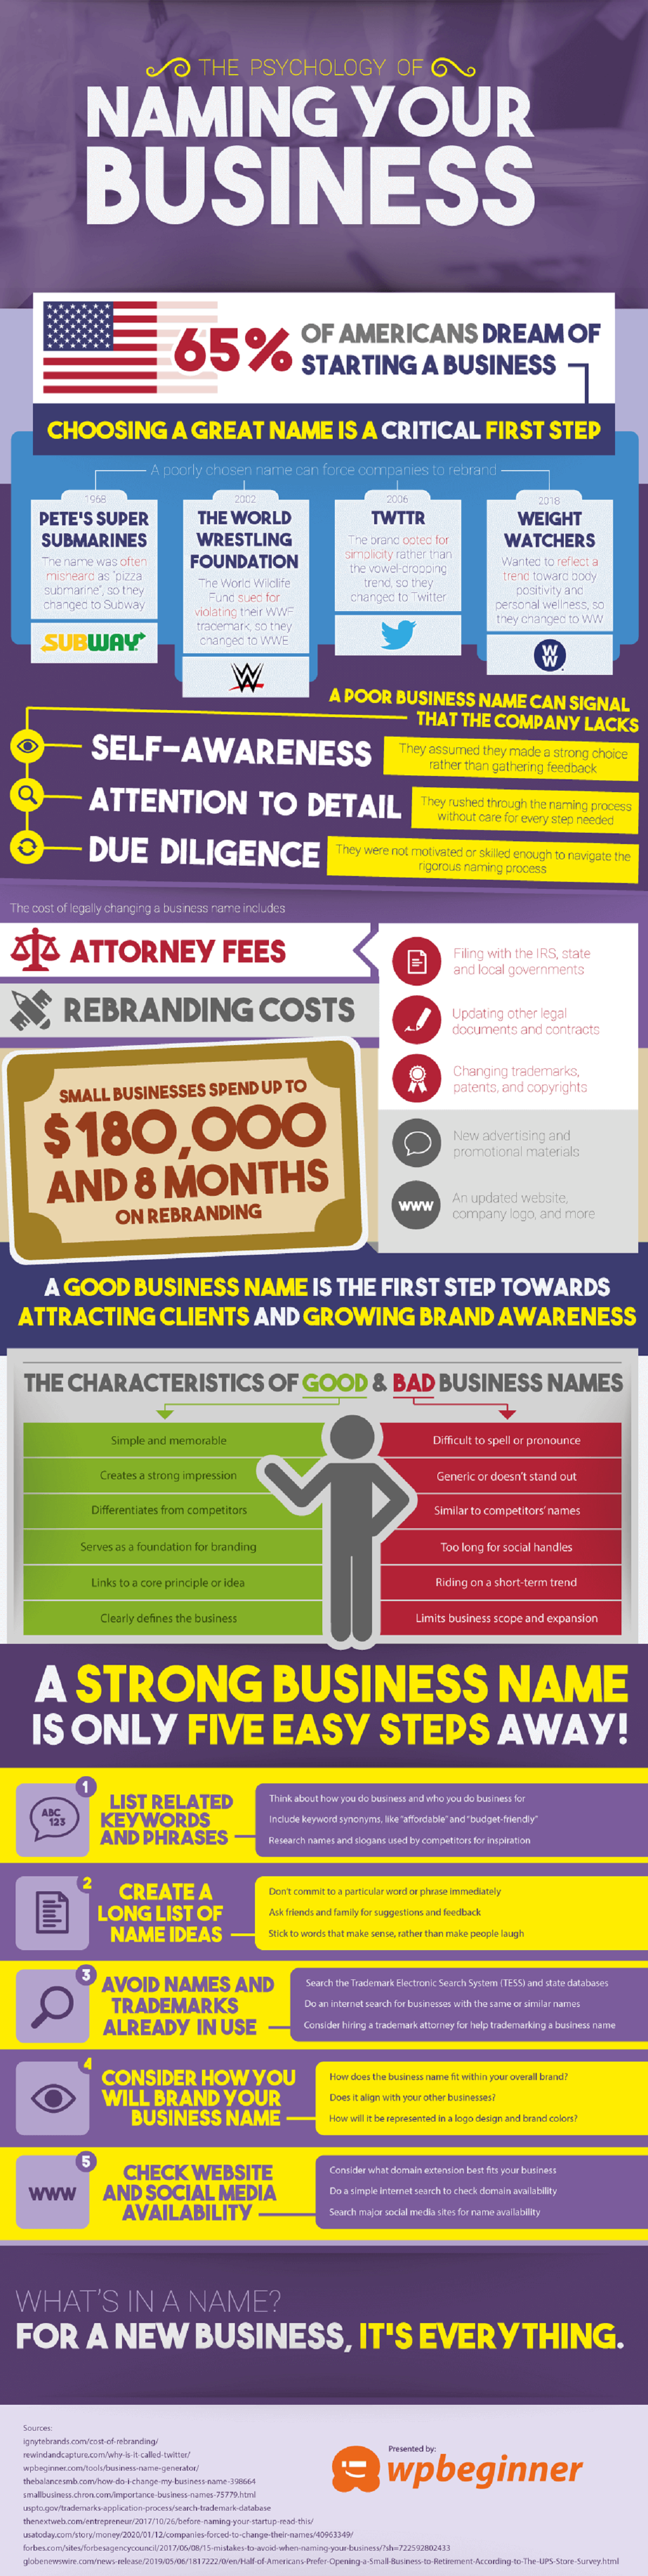 The Psychology of Naming Your Business #infographic